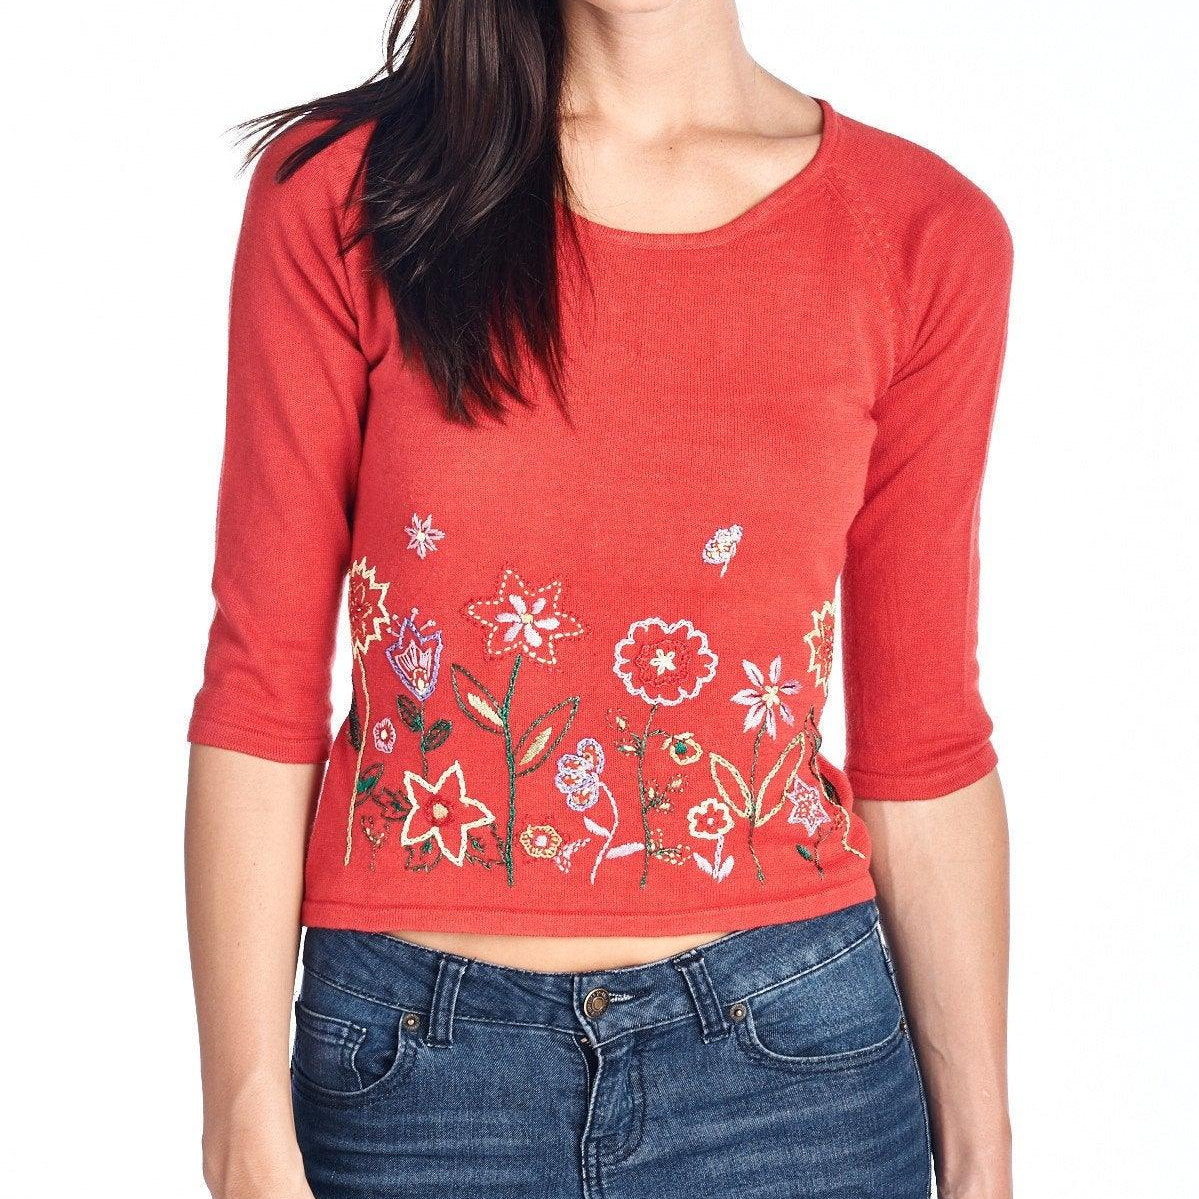 Women's Sweaters Women's Floral Embroidered Tie-Back Crop Sweater